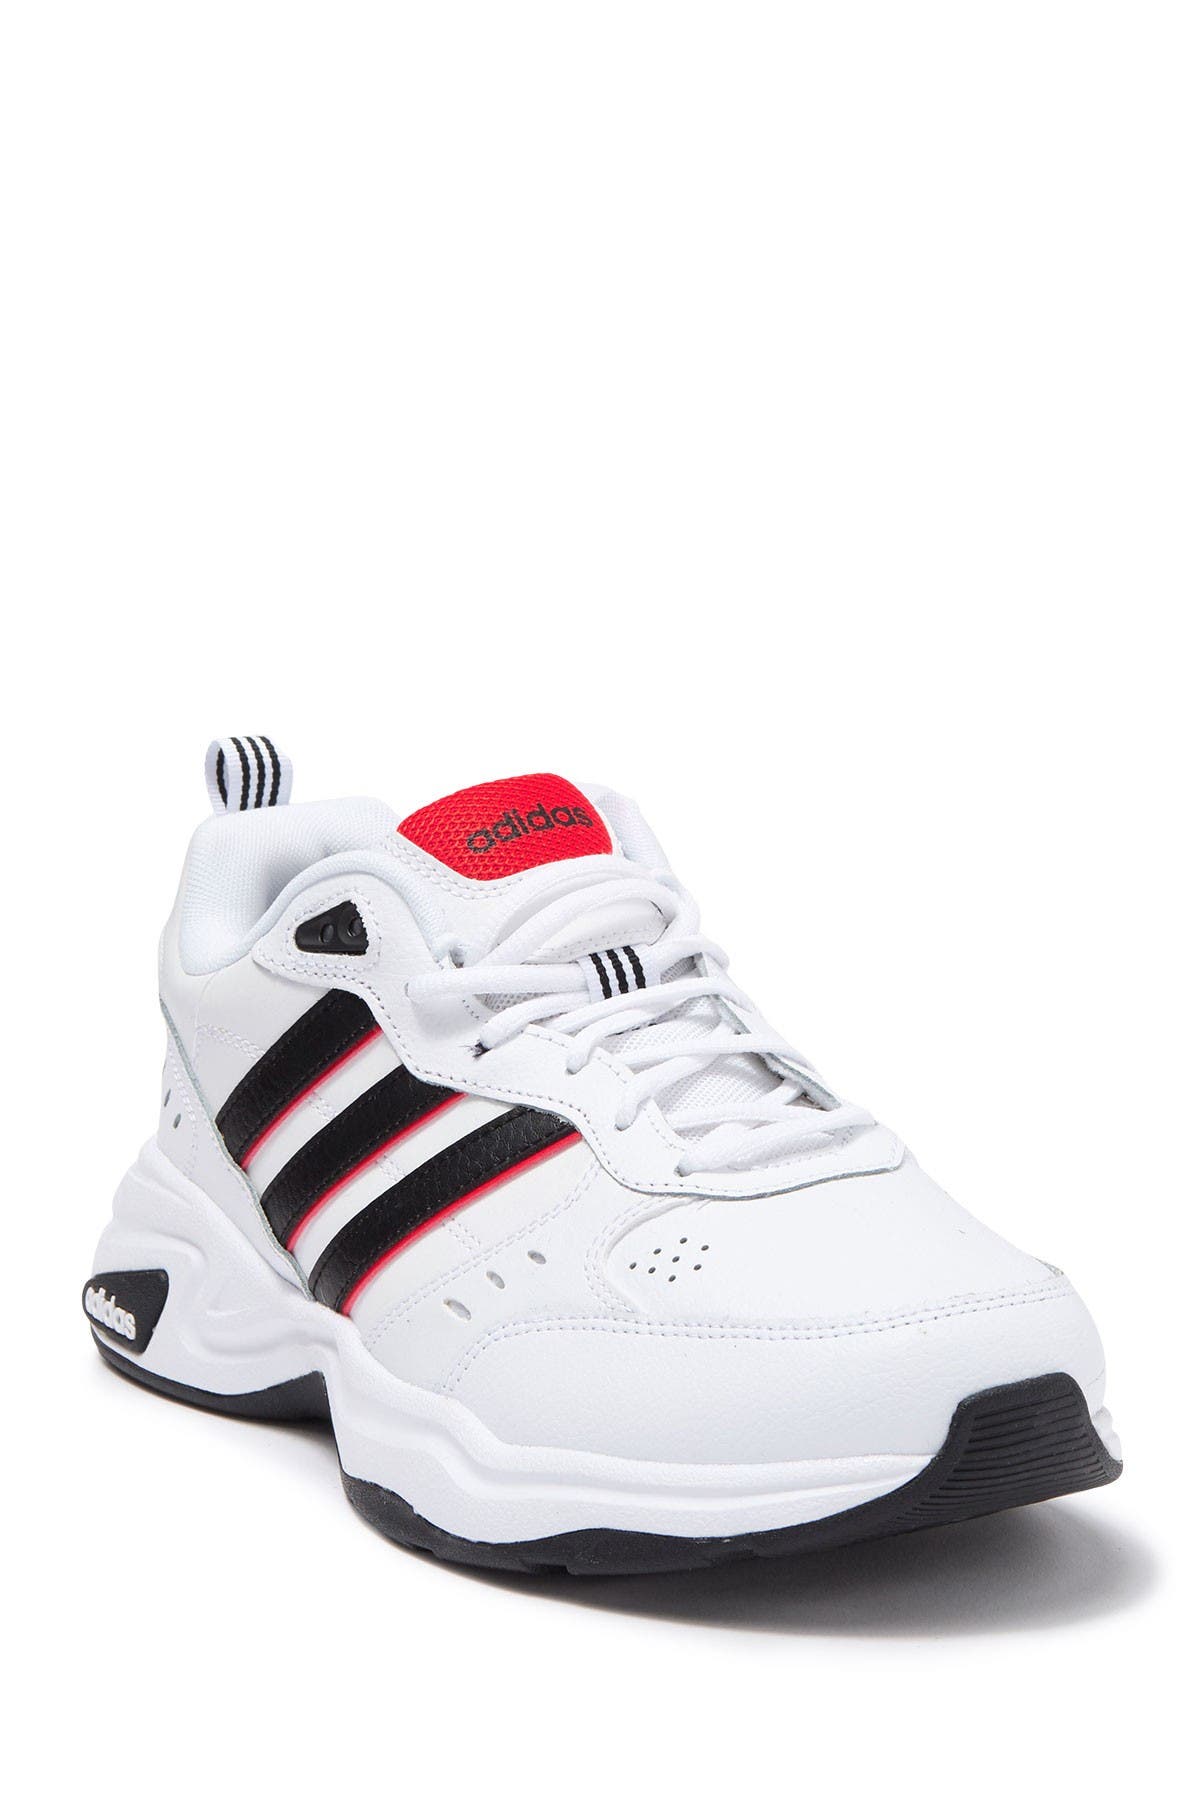 adidas wide width shoes